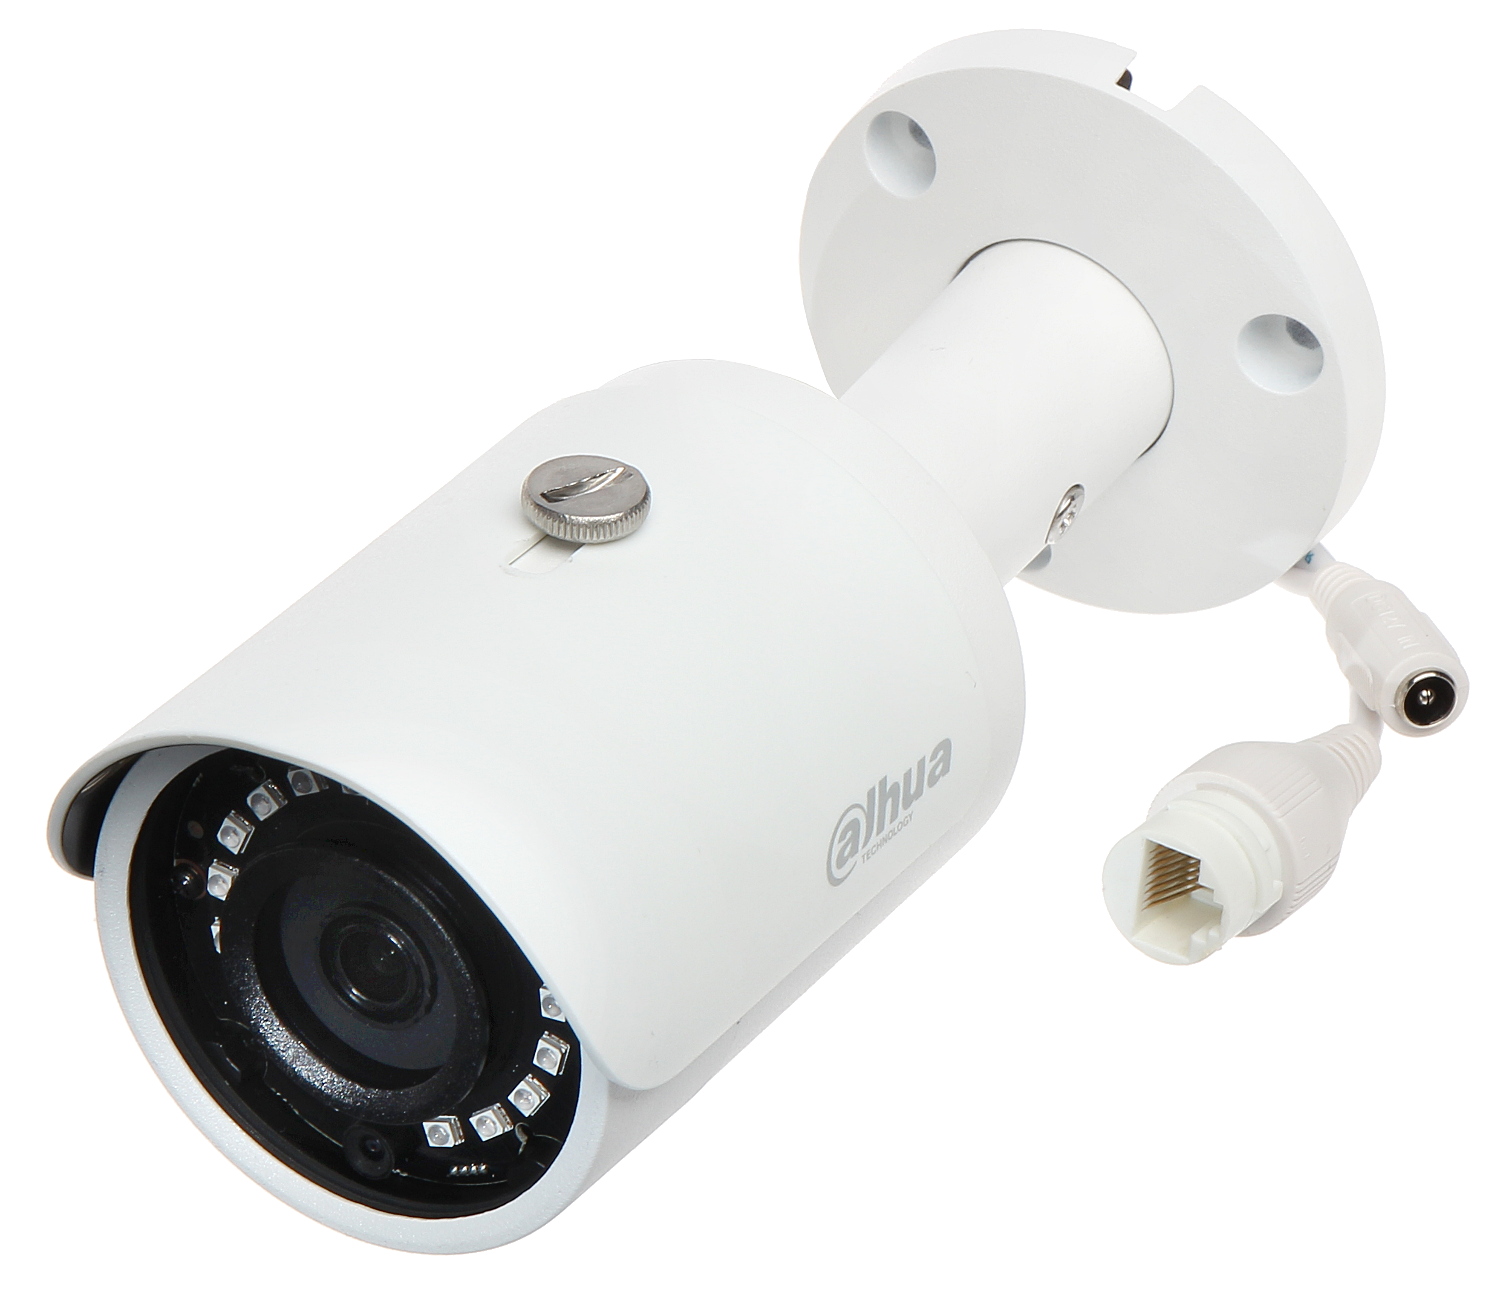 IP CAMERA DH-IPC-HFW4431SP-028 - 4.0 Mpx 2.8 mm DAHUA - IP Cameras with  Fixed-Focal Lens and Ifra-Red Illumina... - Delta